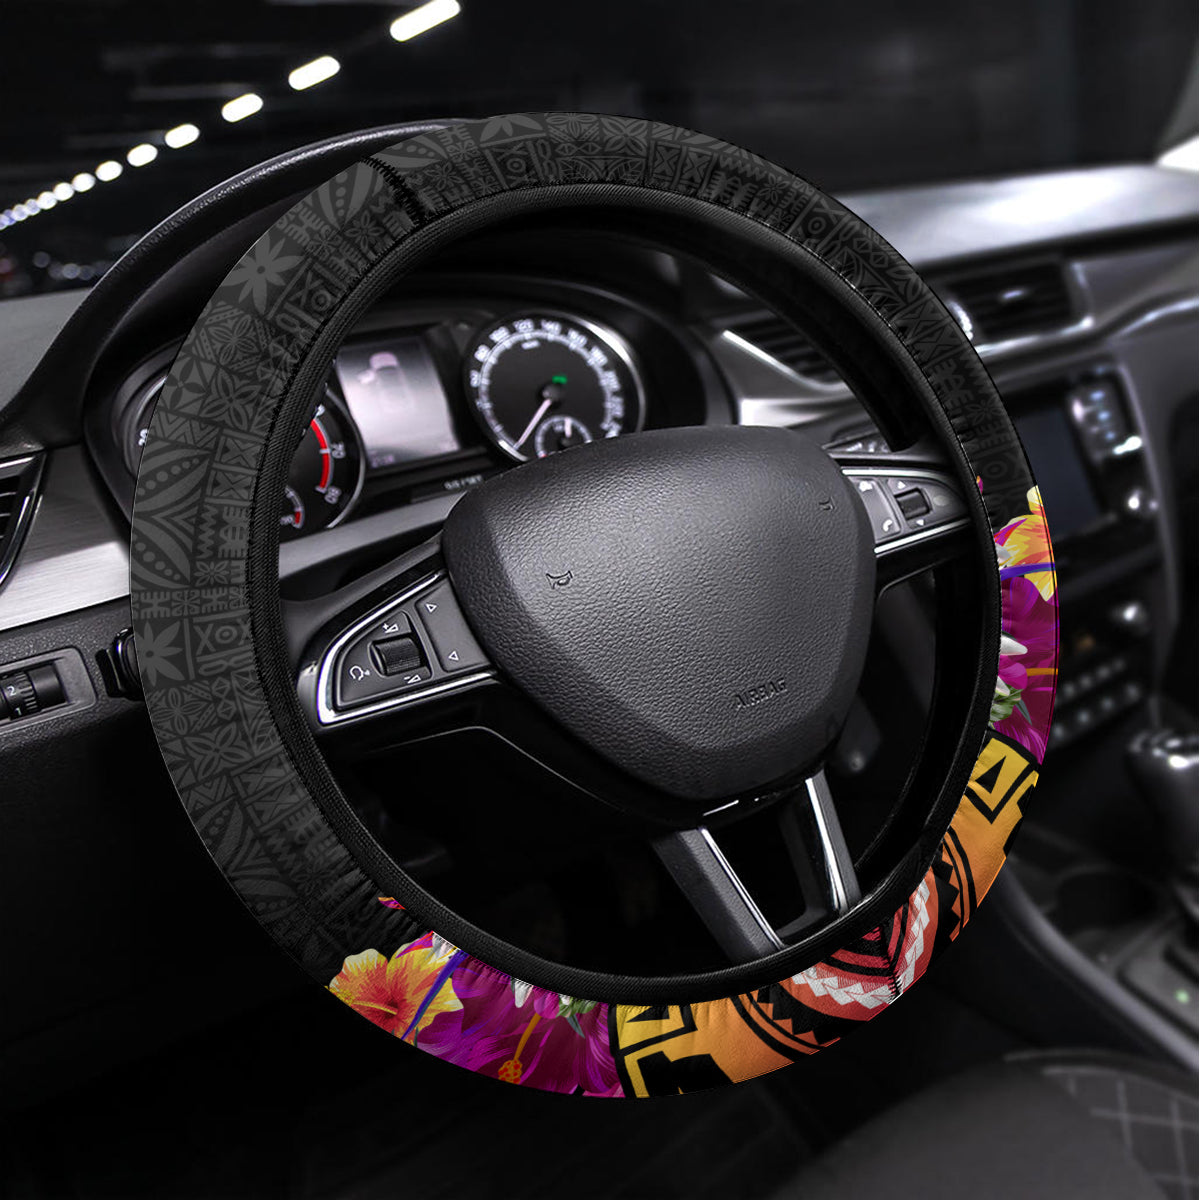 Hawaii Turtle Day Steering Wheel Cover Polynesian Tattoo and Hibiscus Flowers